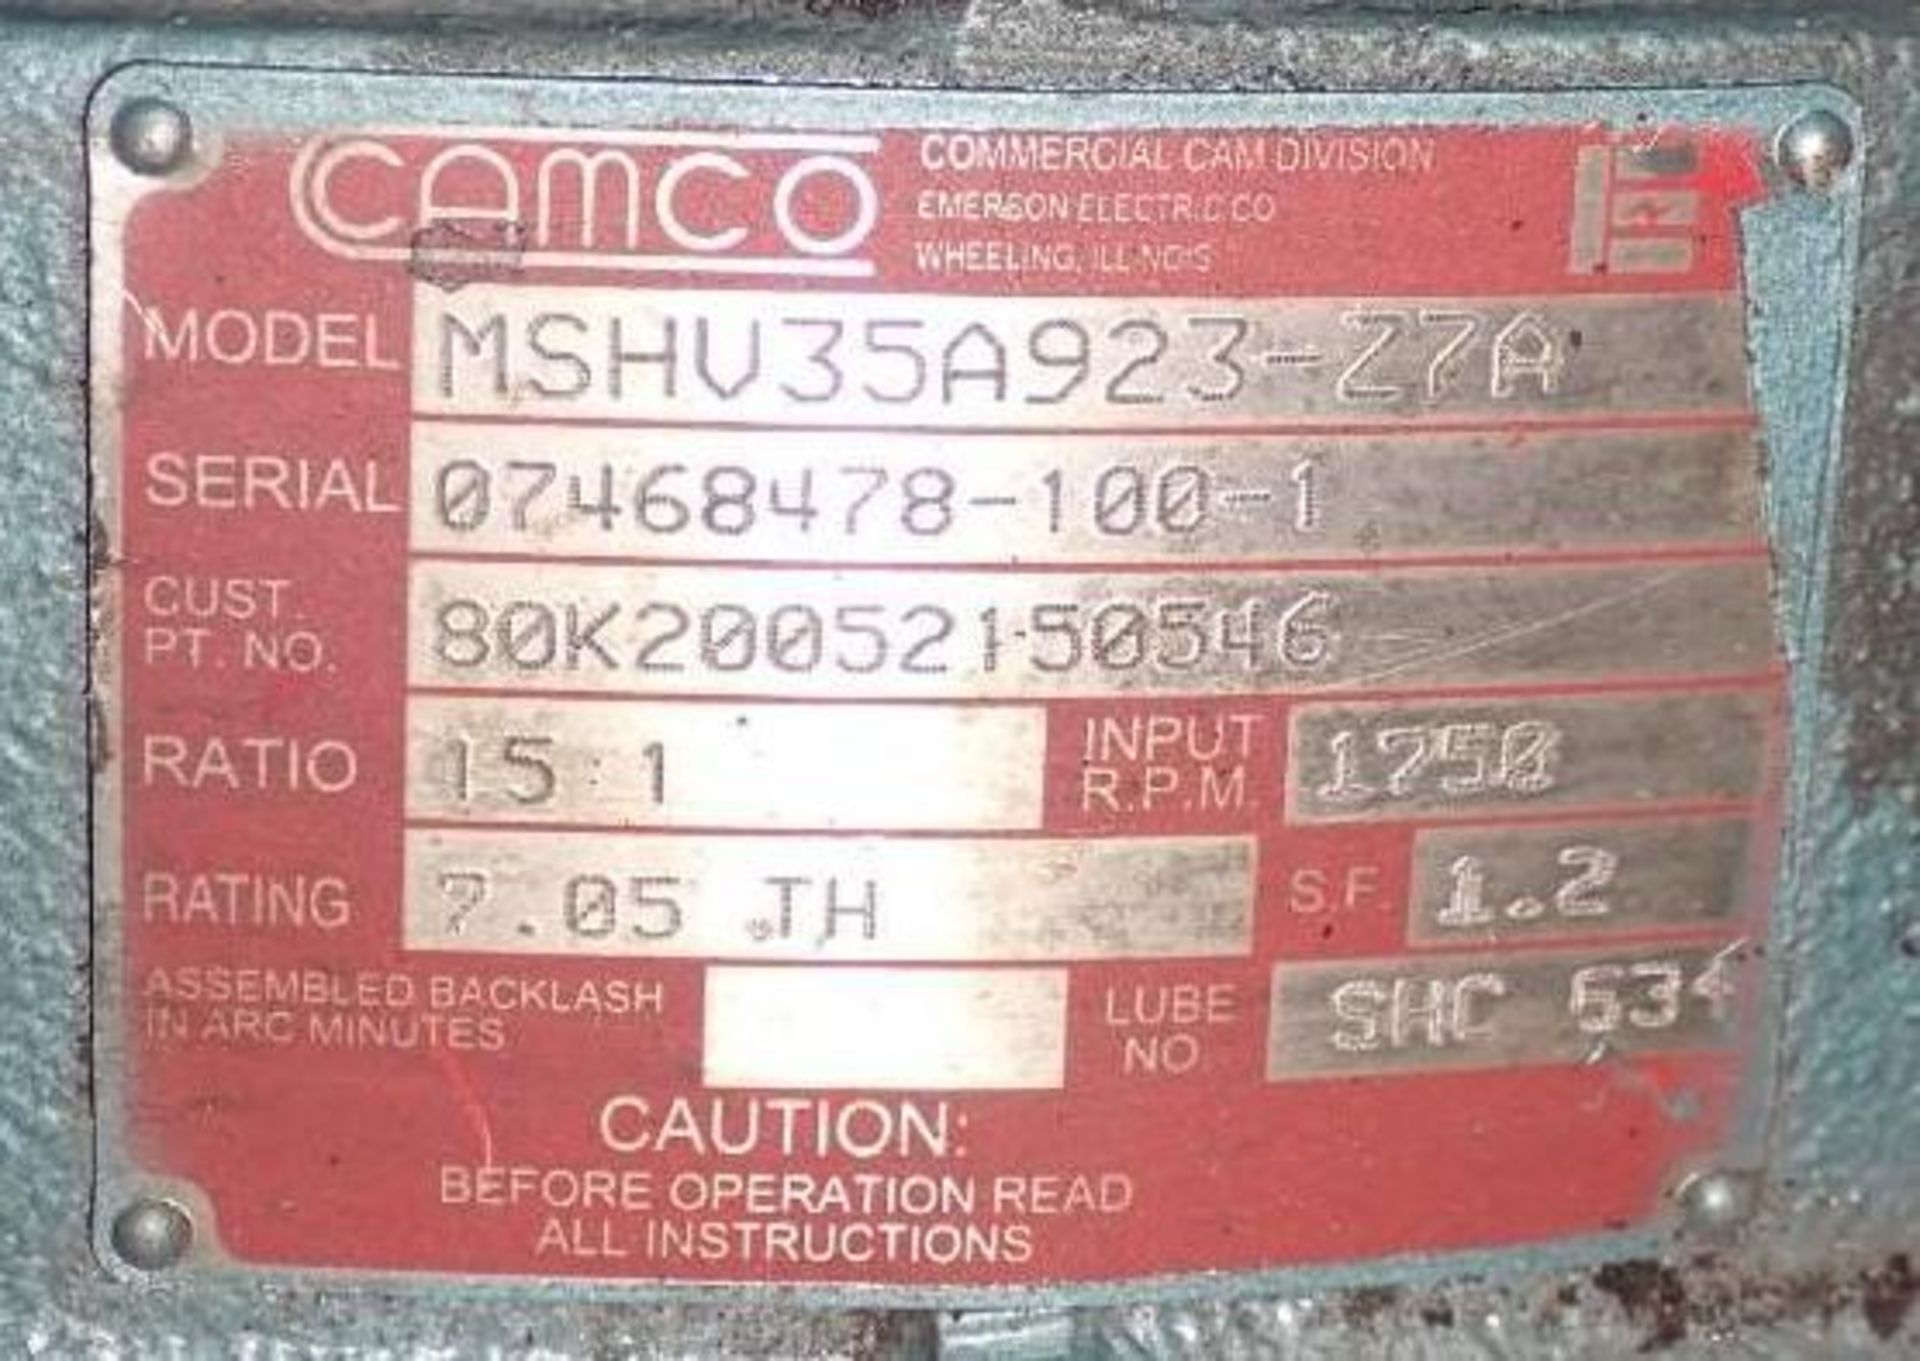 Camco #1100RDM4H48-330 Indexer +++ - Image 4 of 6